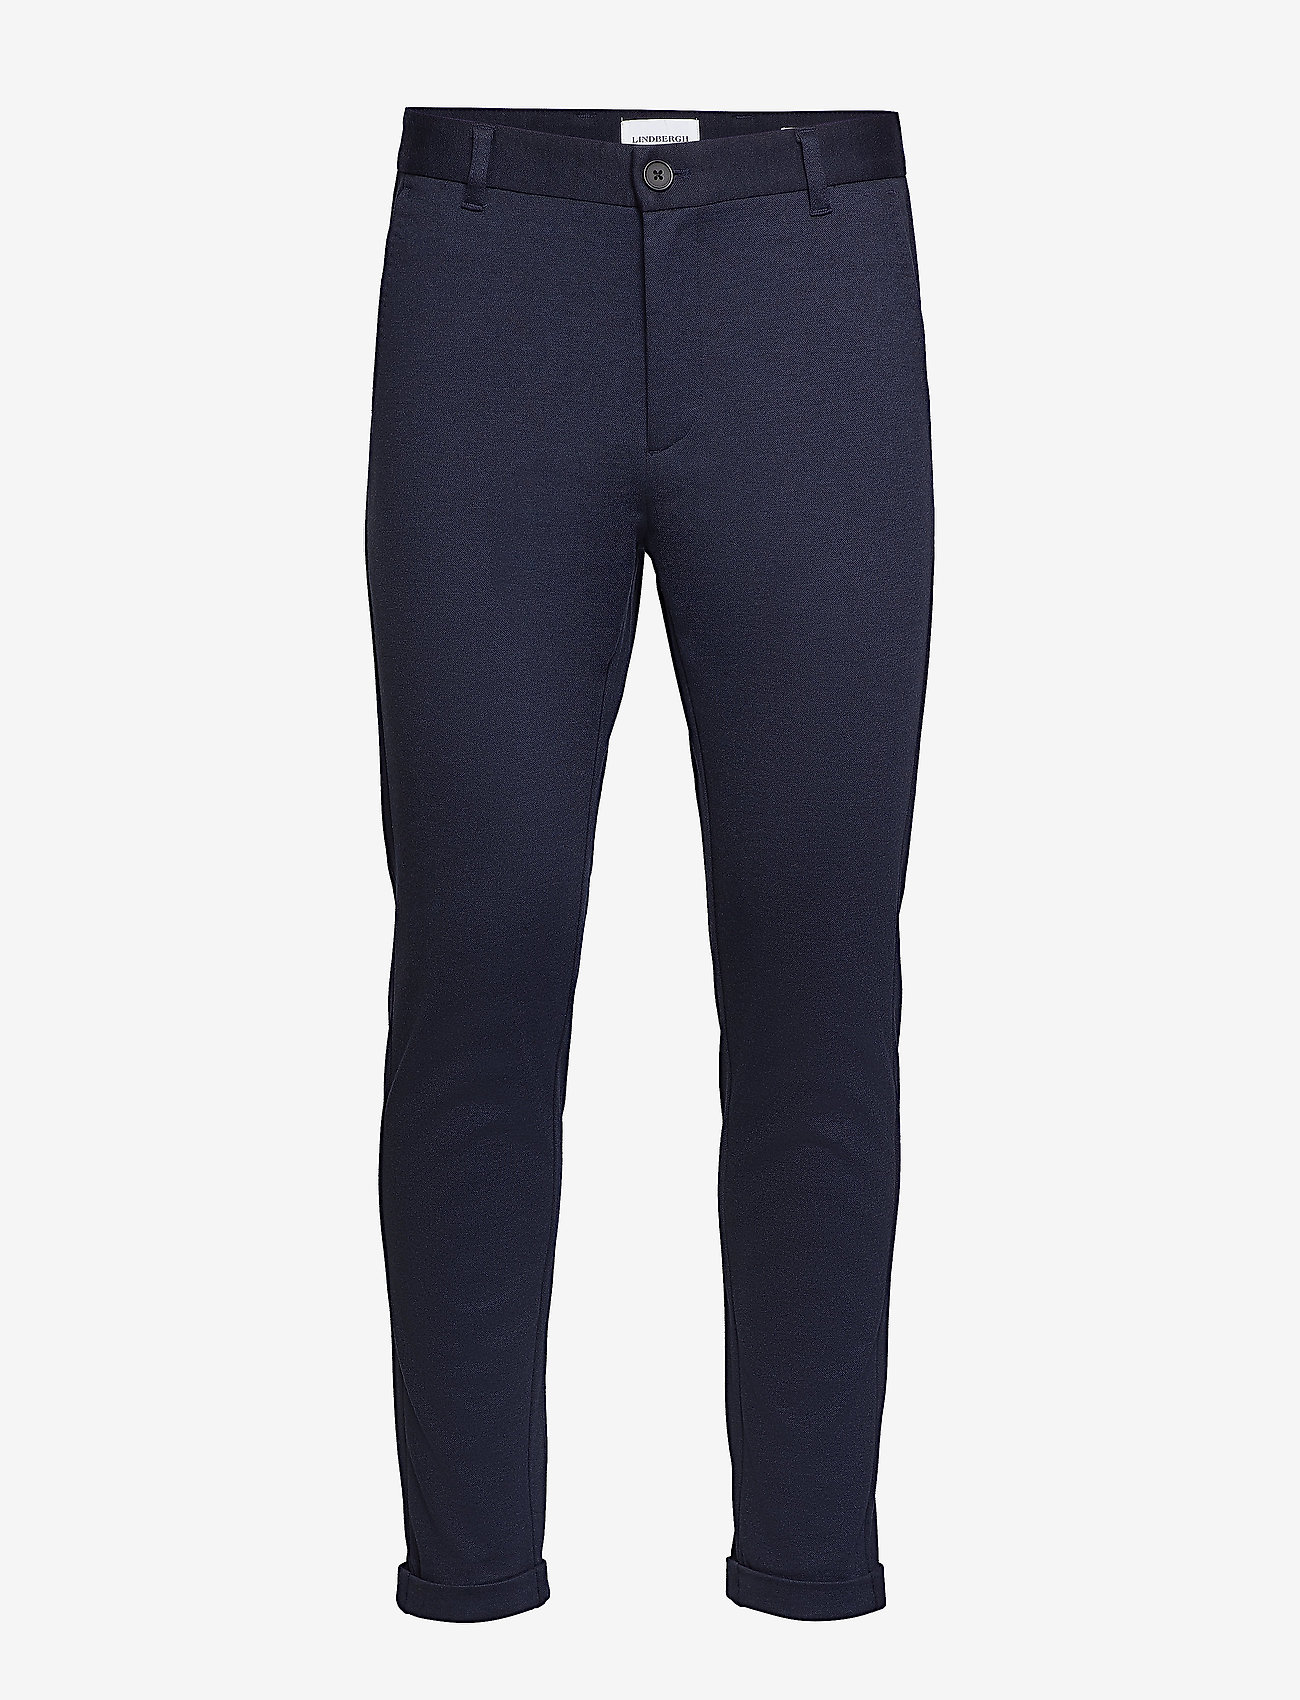 Lindbergh - Superflex knitted cropped pant - nordisk style - navy mix - 1